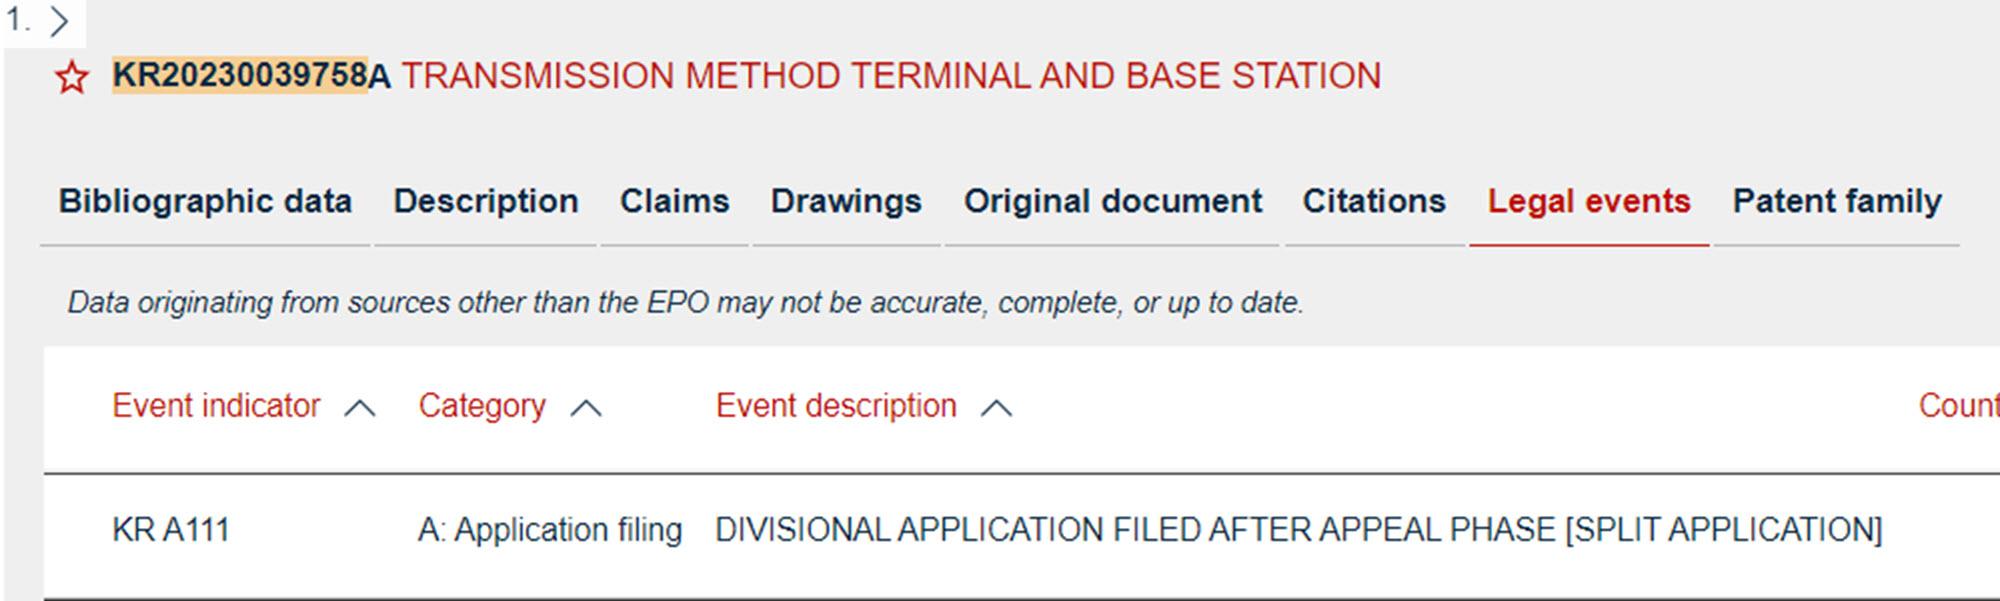 Legal events view in Espacenet showing split application